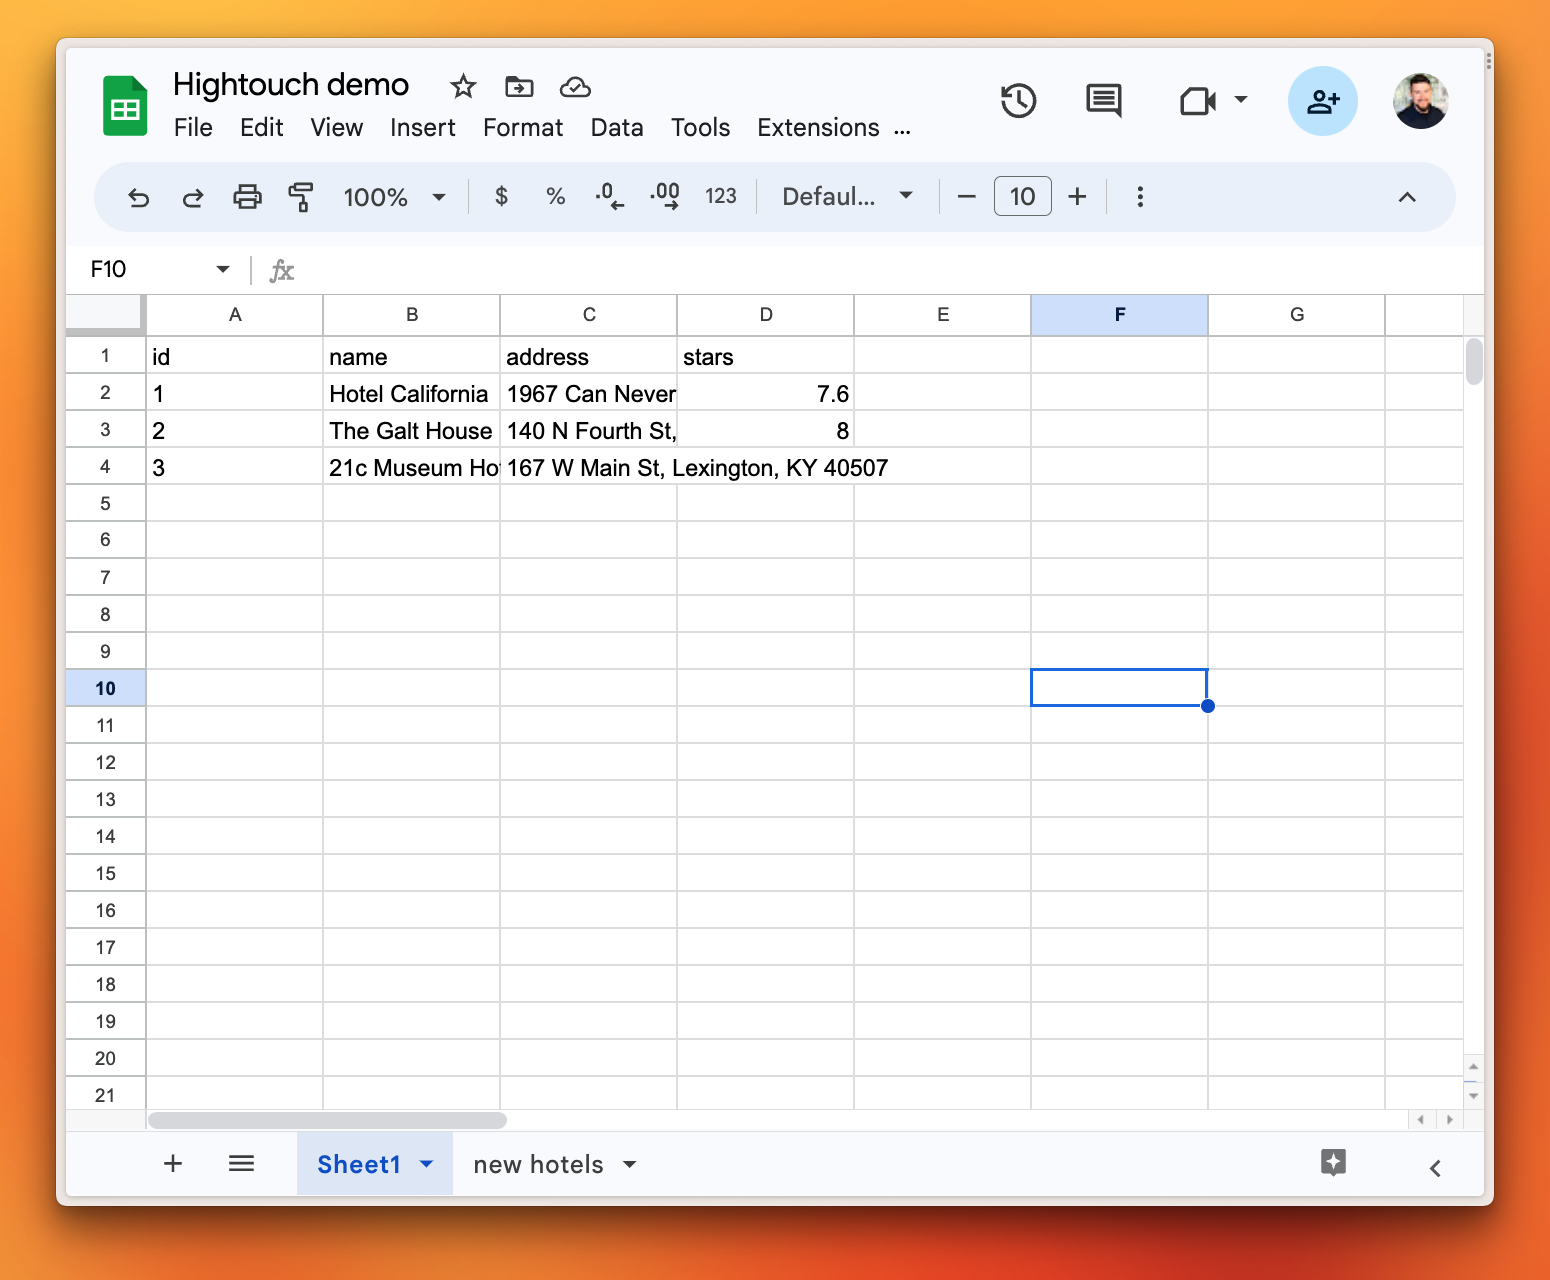 The synced data in Google Sheets